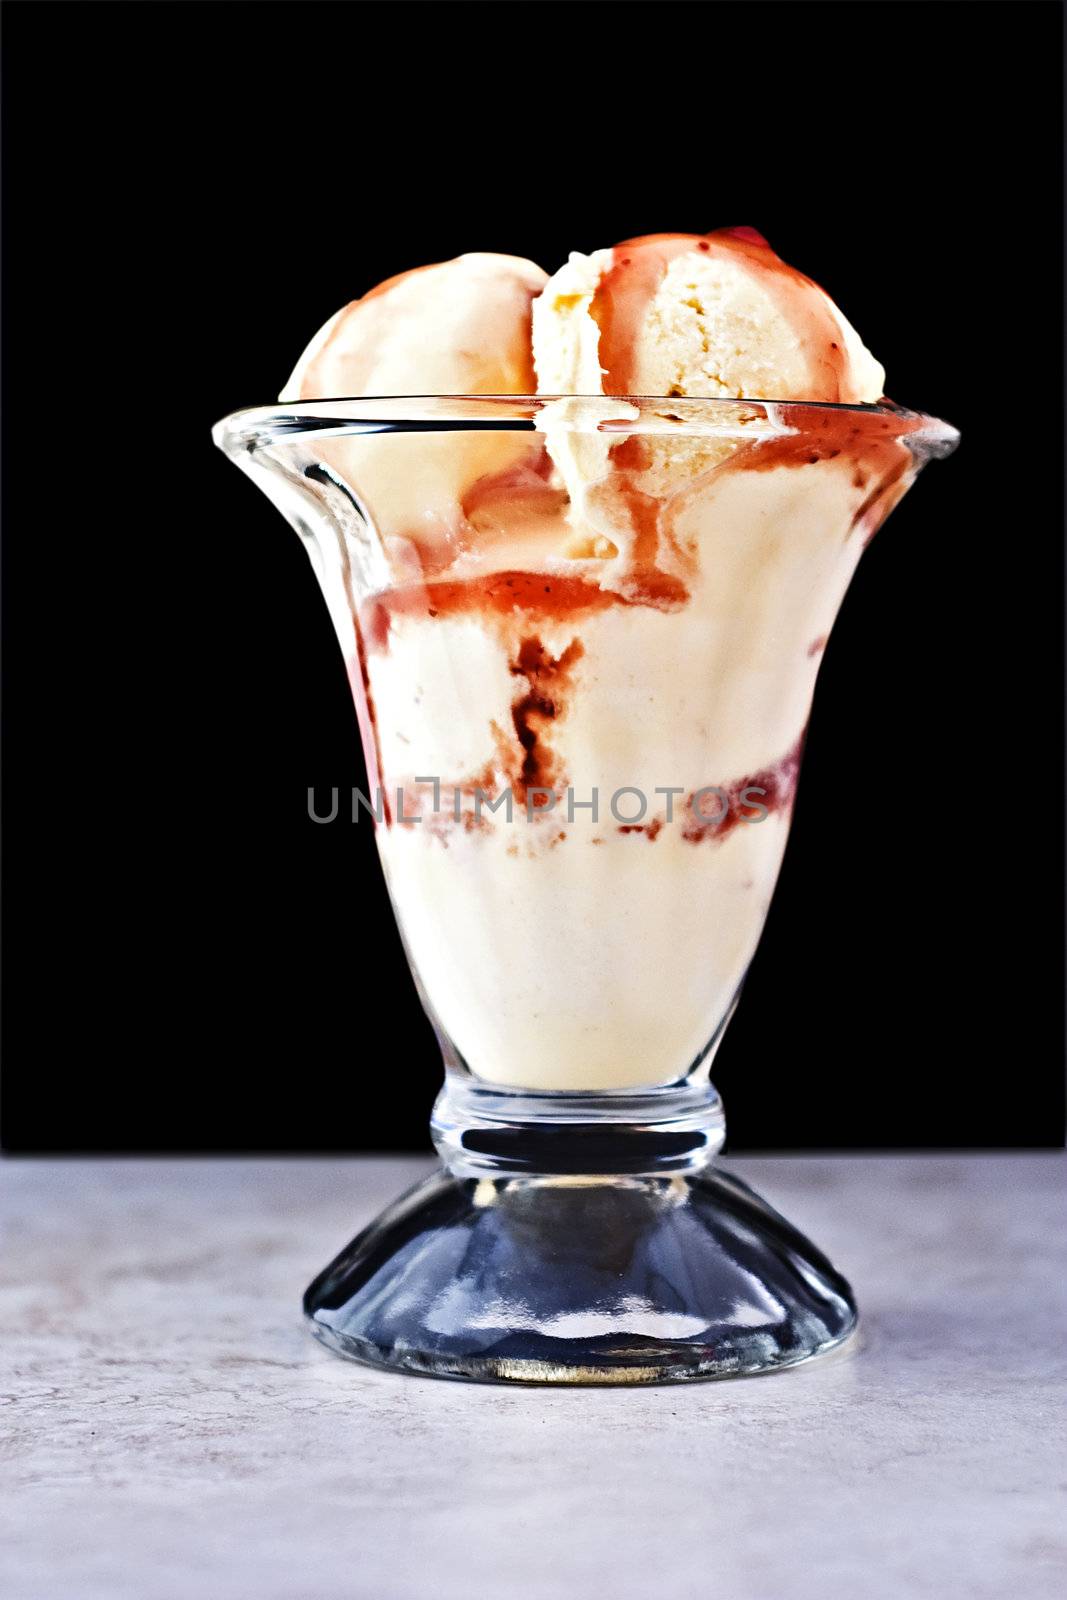 French vanilla ice cream with fruit sauce against a black background

